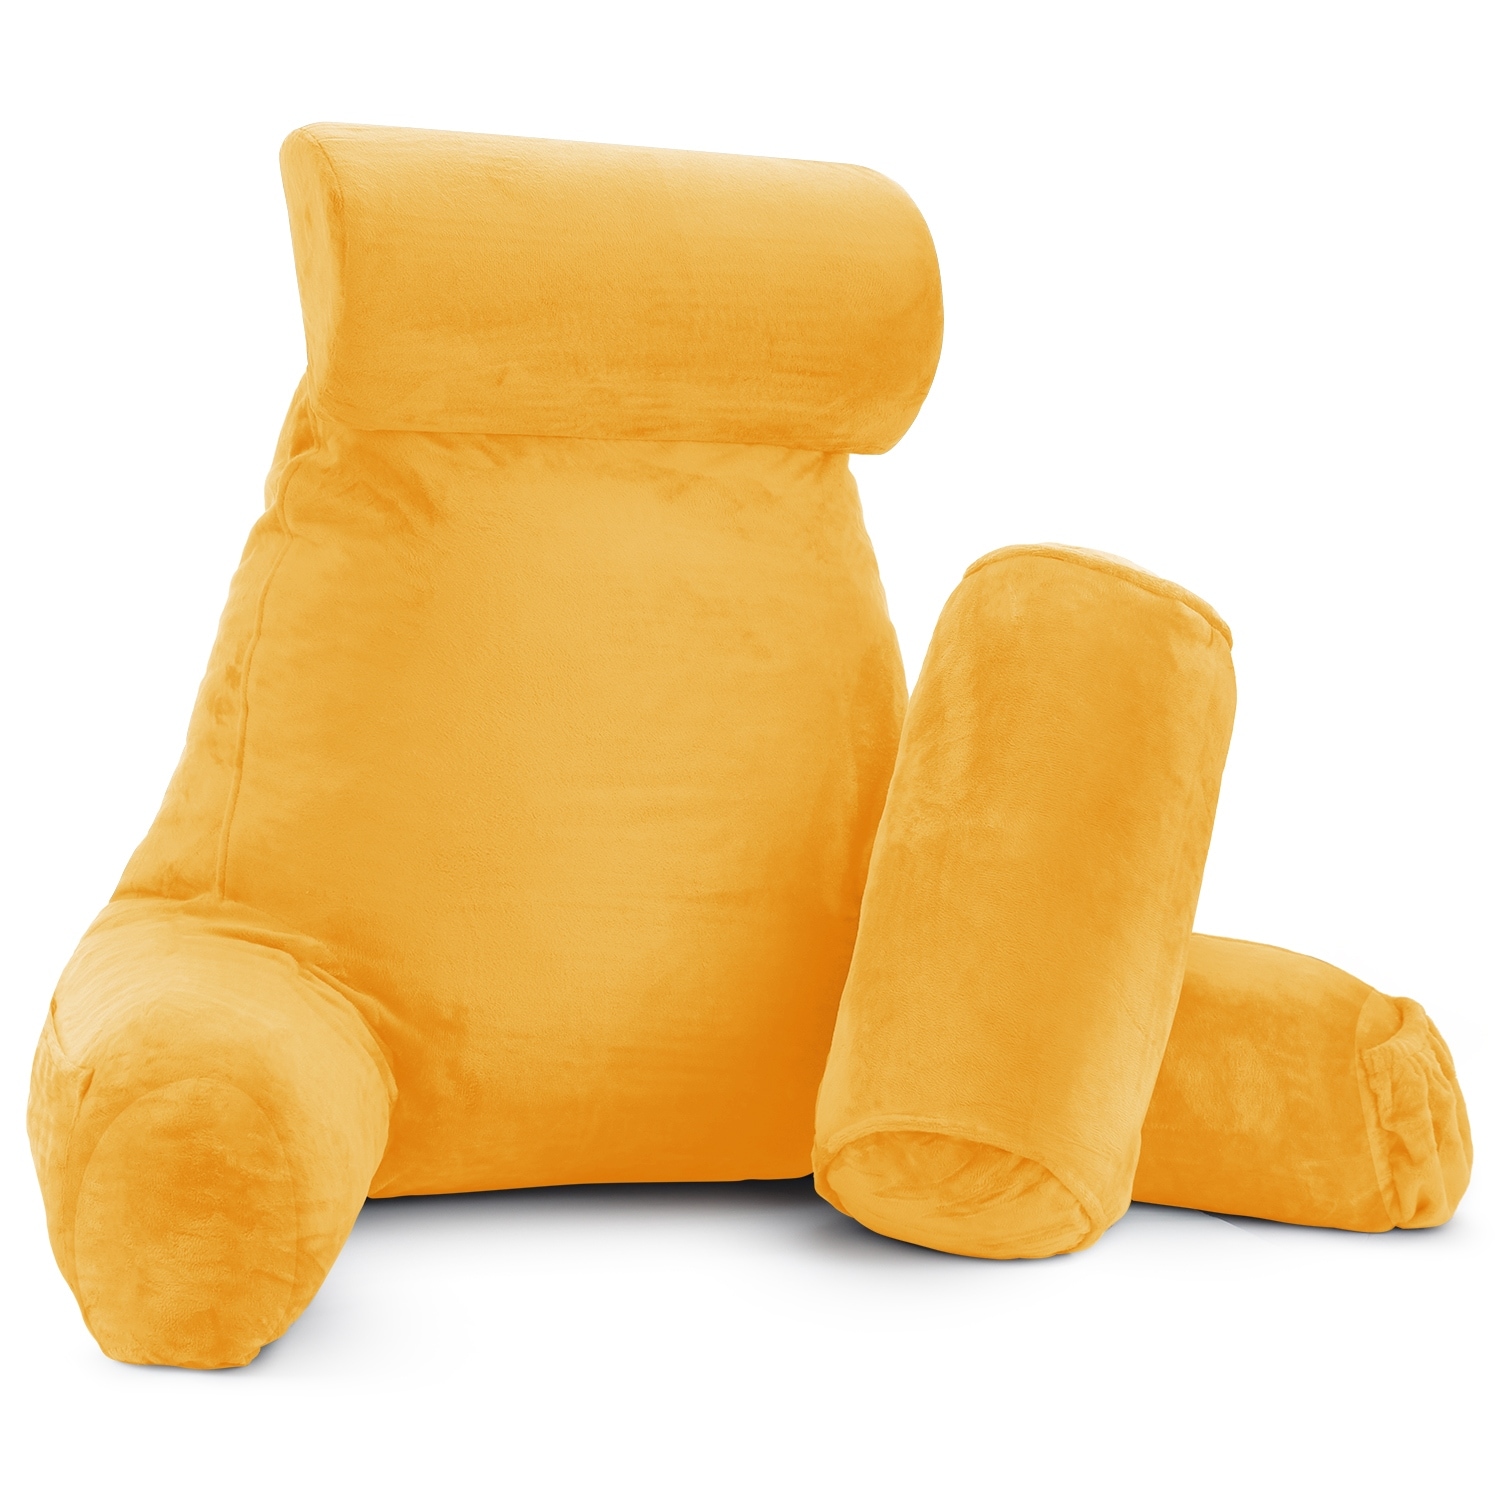 https://ak1.ostkcdn.com/images/products/is/images/direct/5b482778869478293a45336aa68bc188e6f5df89/Nestl-Backrest-Reading-Pillow-with-Arms---Shredded-Memory-Foam-Back-Support-Bed-Rest-Pillow.jpg